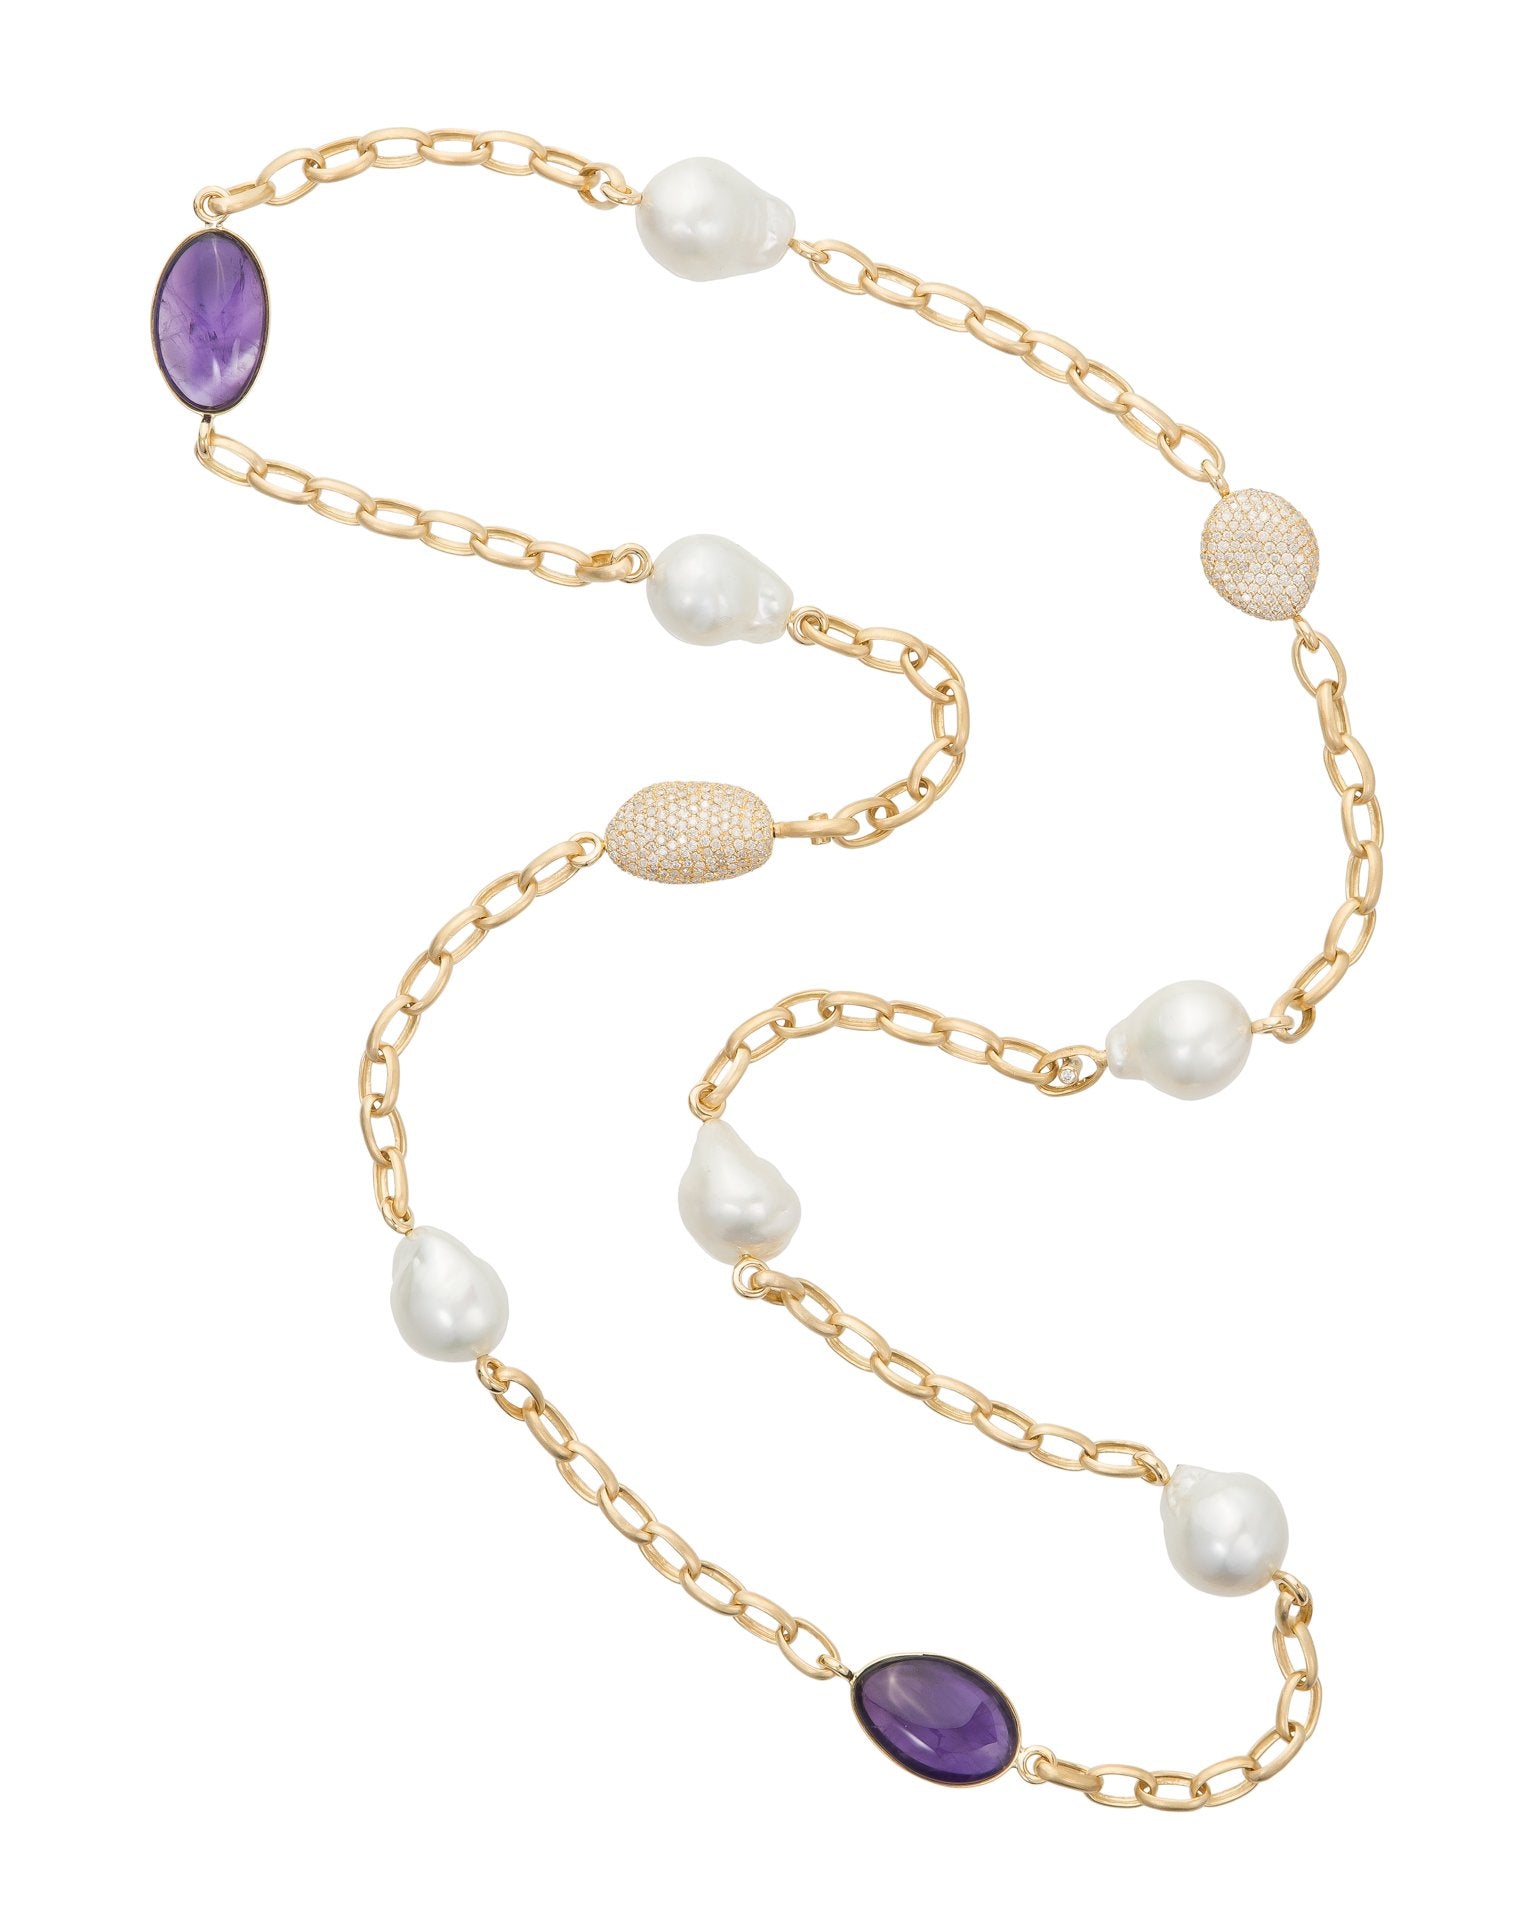 Necklace with Australian South Sea Pearls, amethyst pebbles and diamond pave pebbles with 18 karat yellow gold chain.